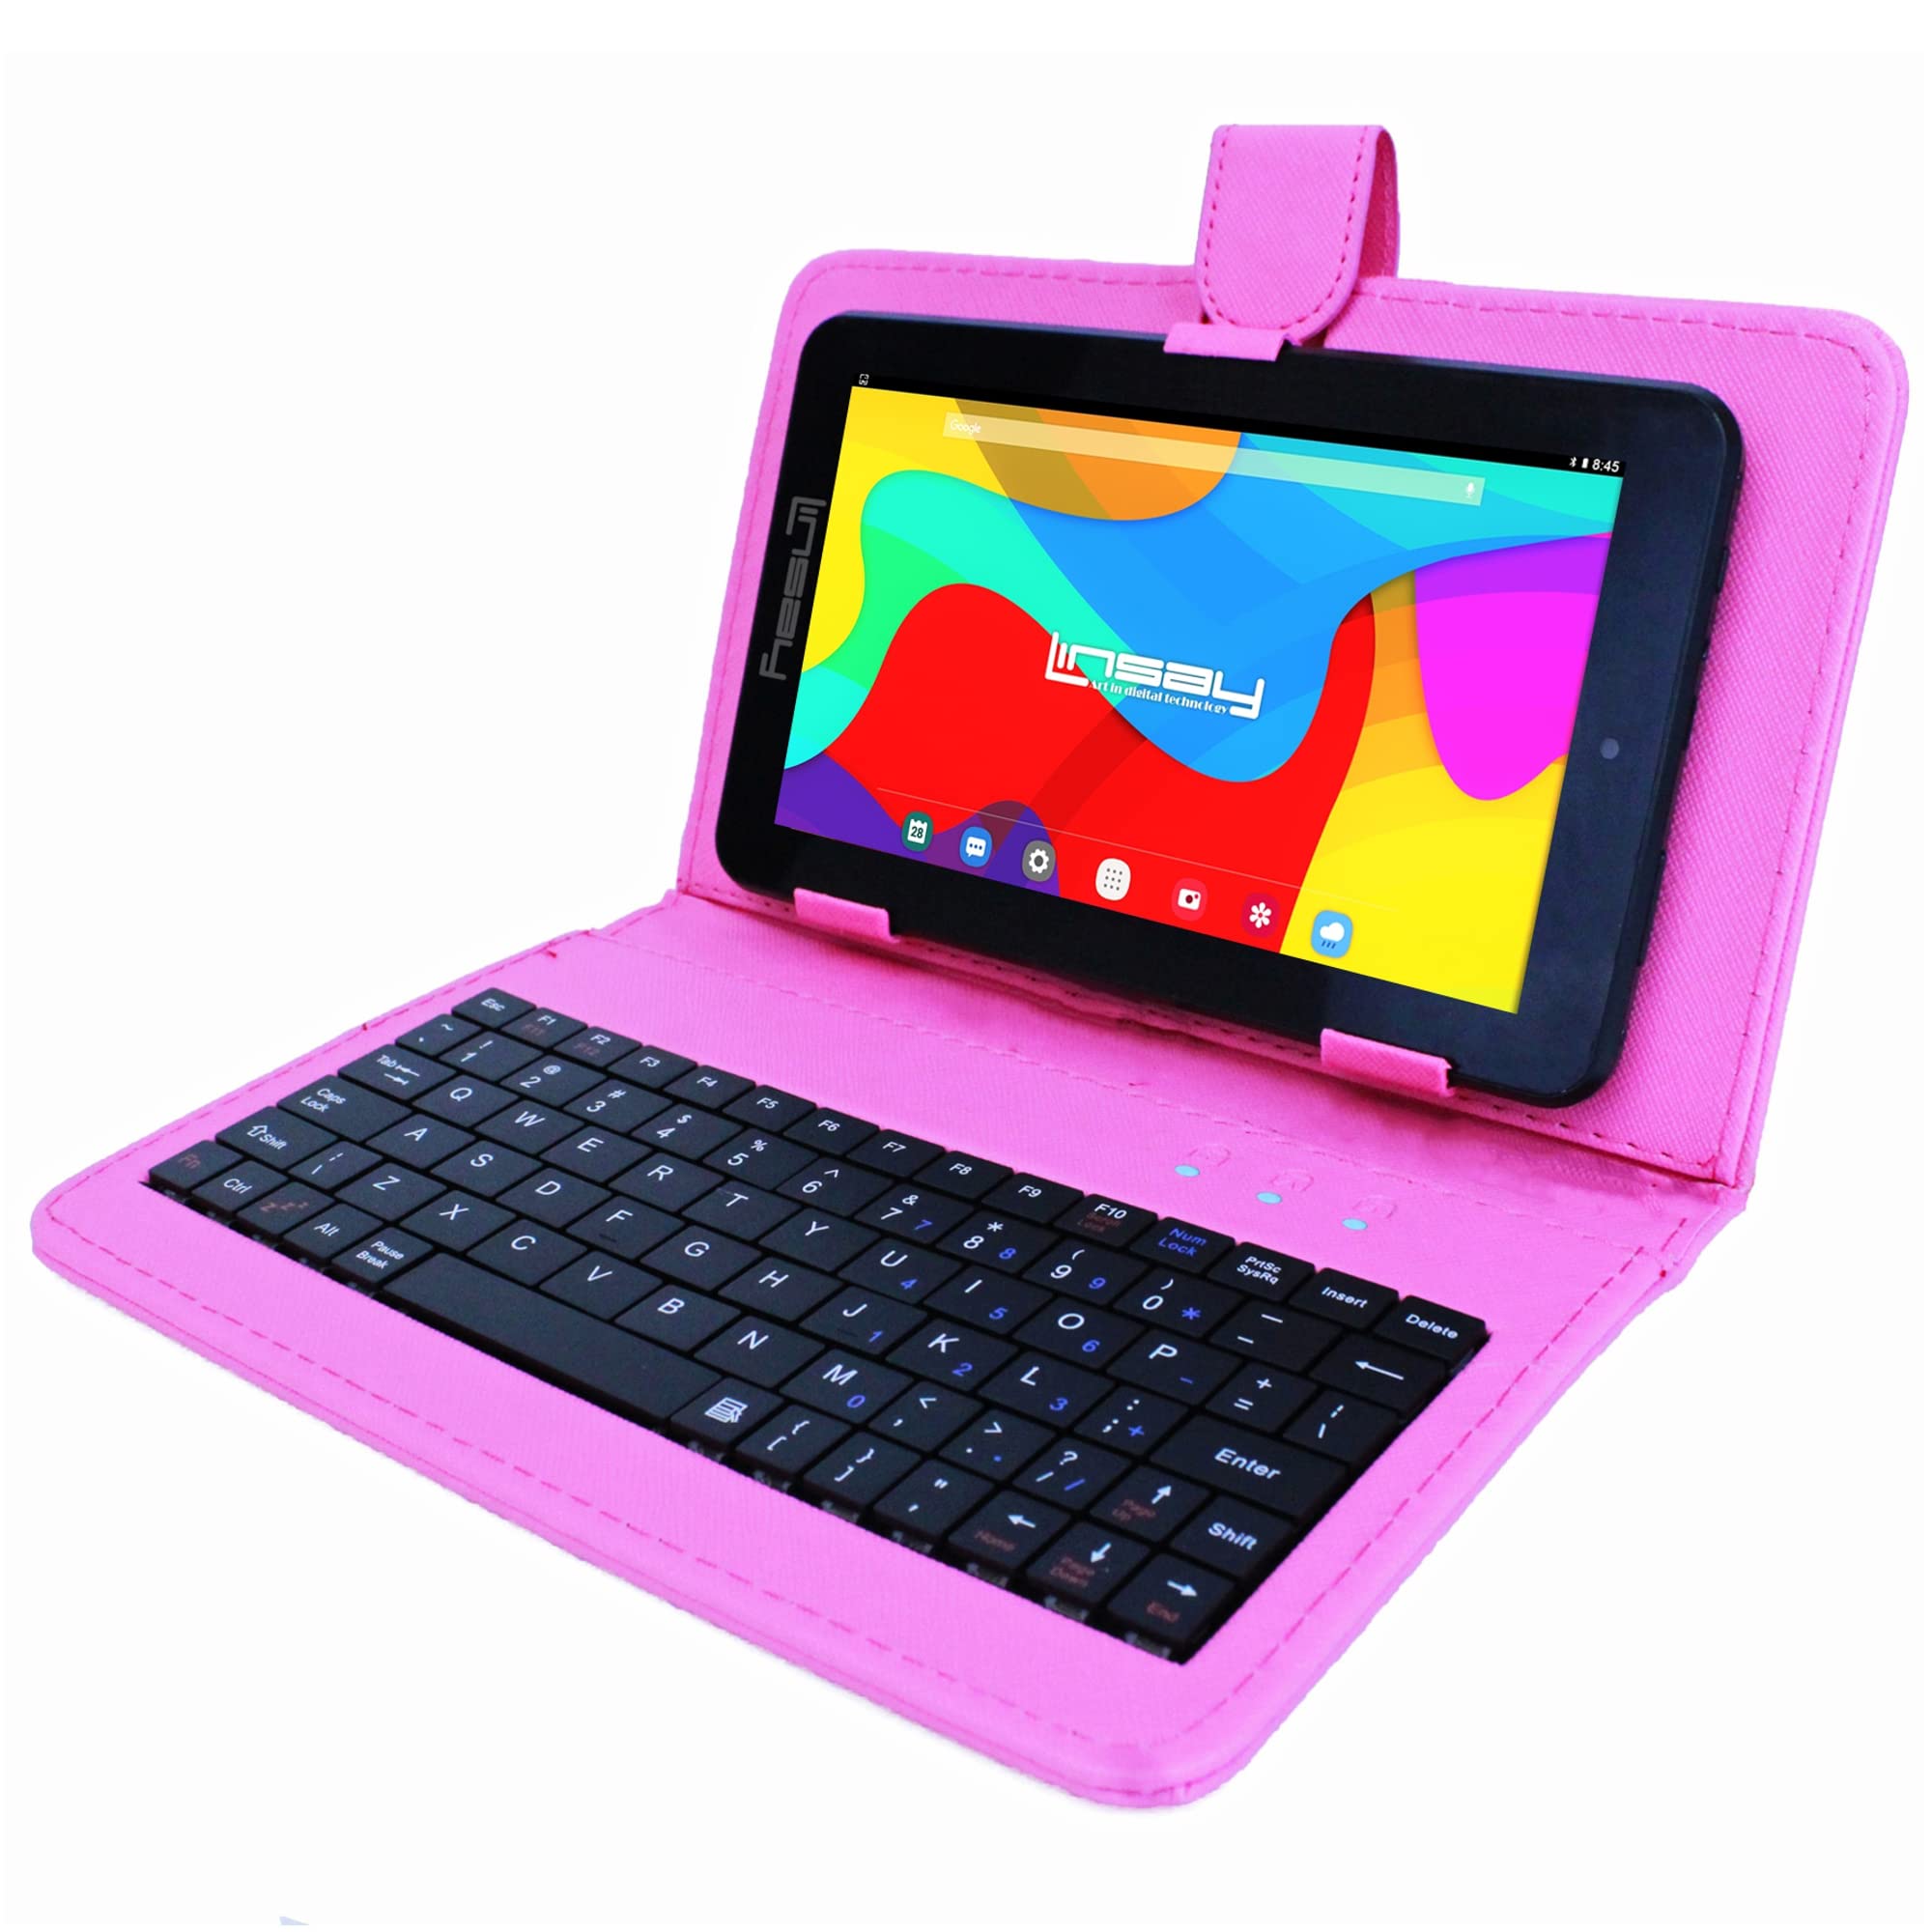 LINSAY 7" 2GB RAM 32GB Storage Android 12 Tablet with Pink Leather Keyboard, Pop Holder and Pen Stylus